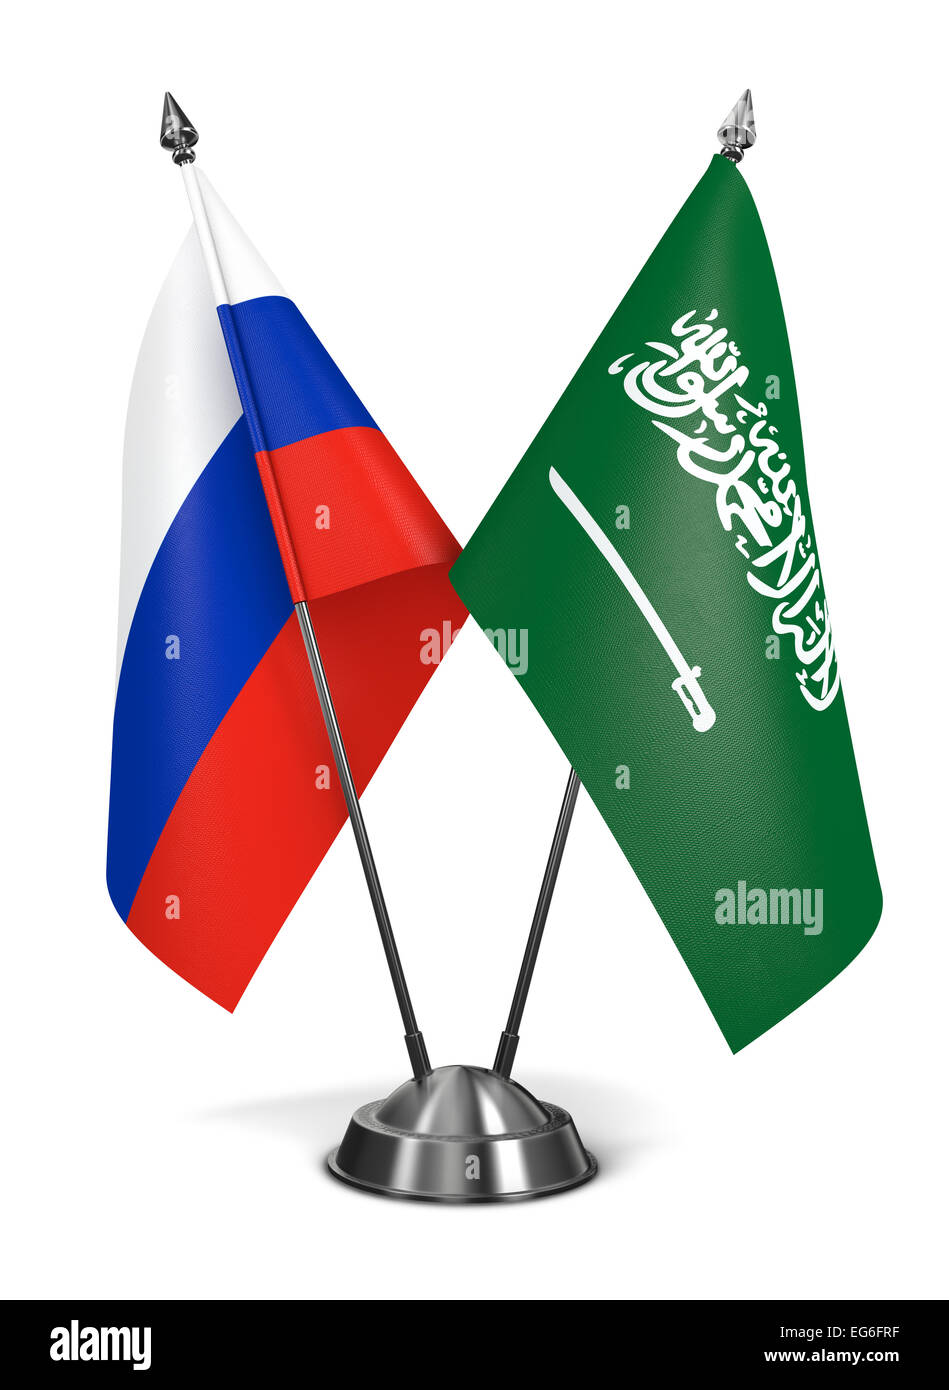 Russia and Saudi Arabia - Miniature Flags Isolated on White Background. Stock Photo